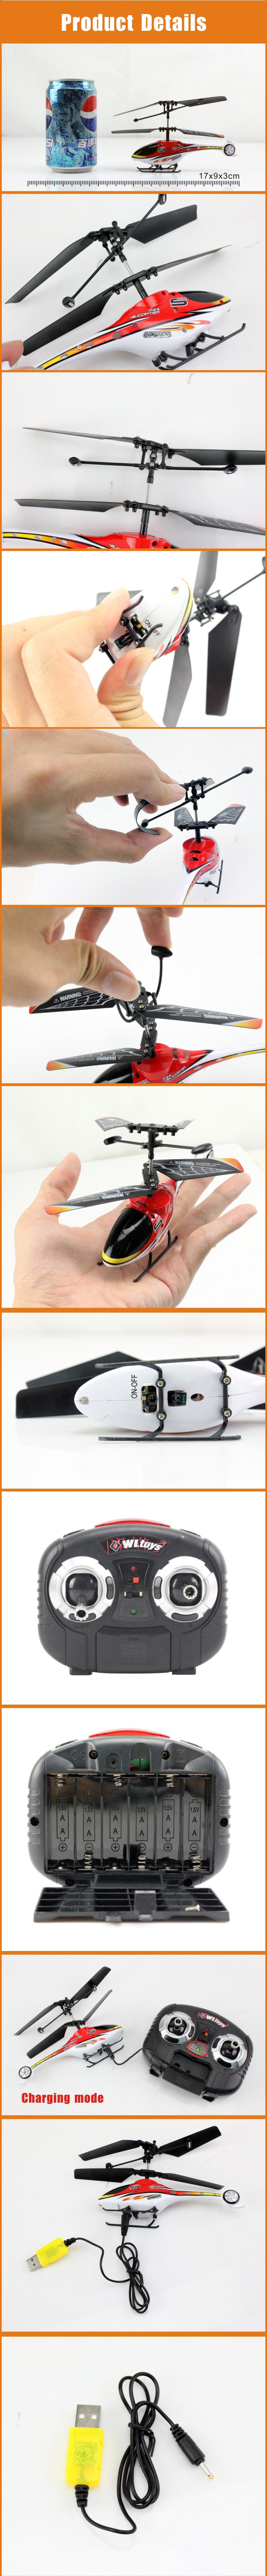 mini helicopter,IR helicopter,rc helicopter 2ch,RC helicopter